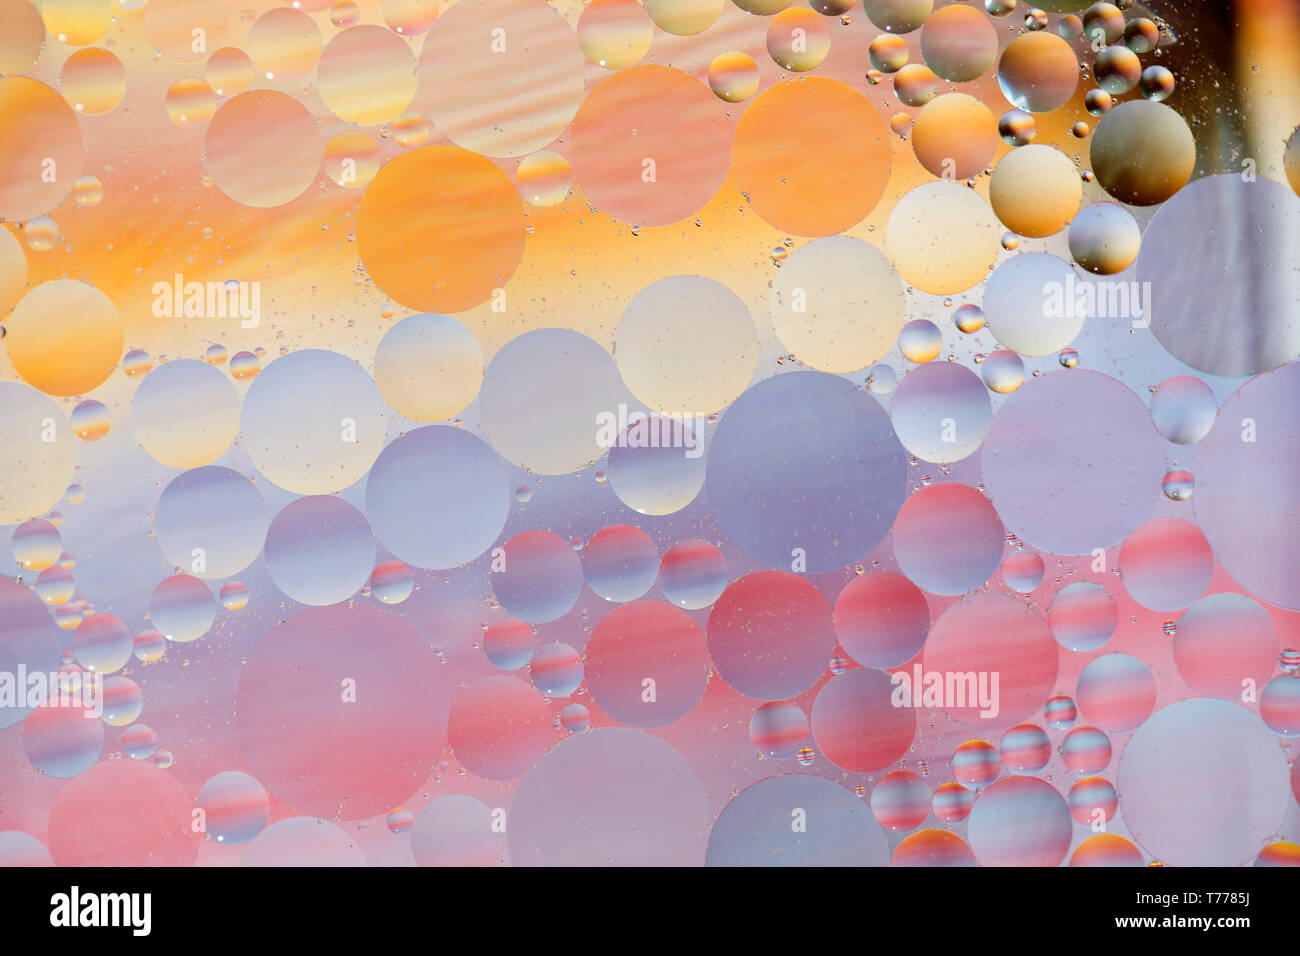 Oil drops in water -  colorful abstract background Stock Photo